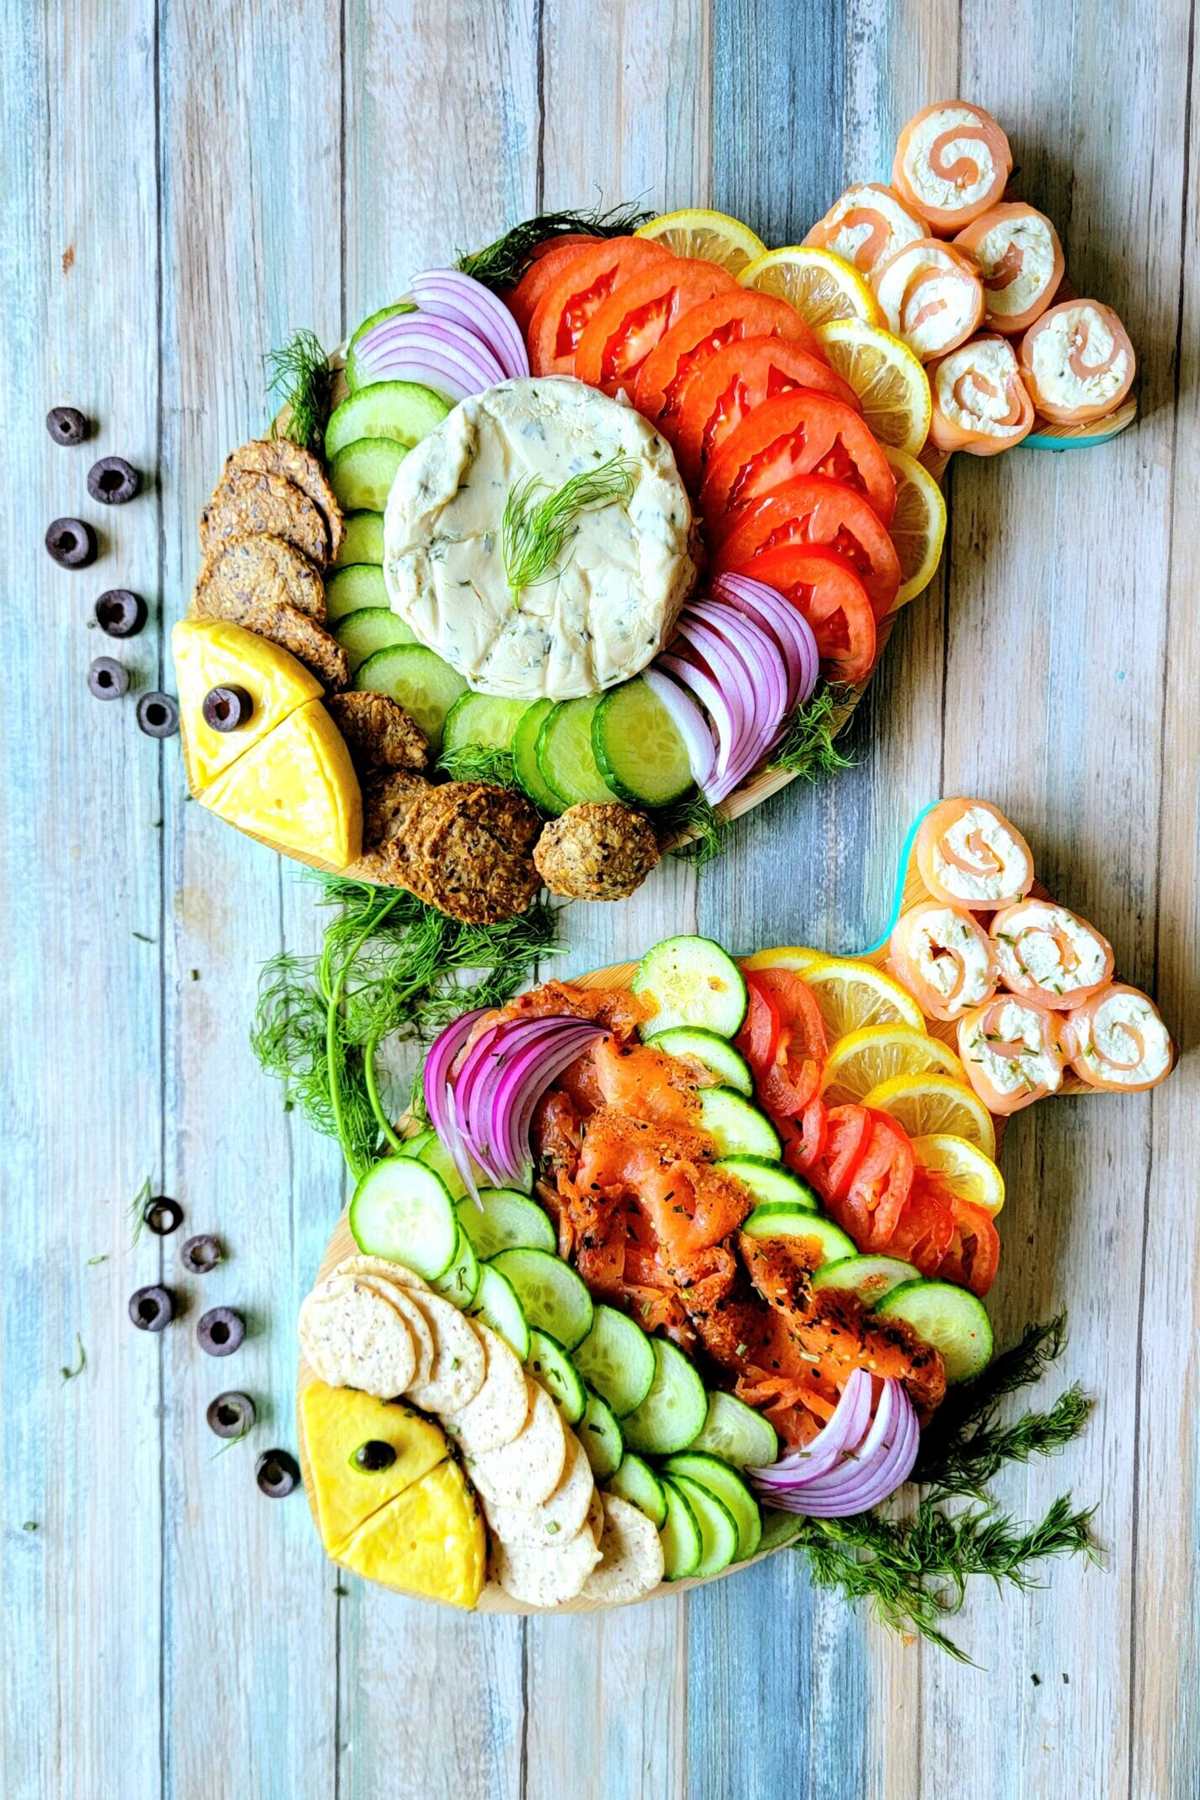 Kosher Everyday's Smoked Salmon Charcuterie board is filled with fresh veggies, cream cheese, crackers, onions and cucumbers.